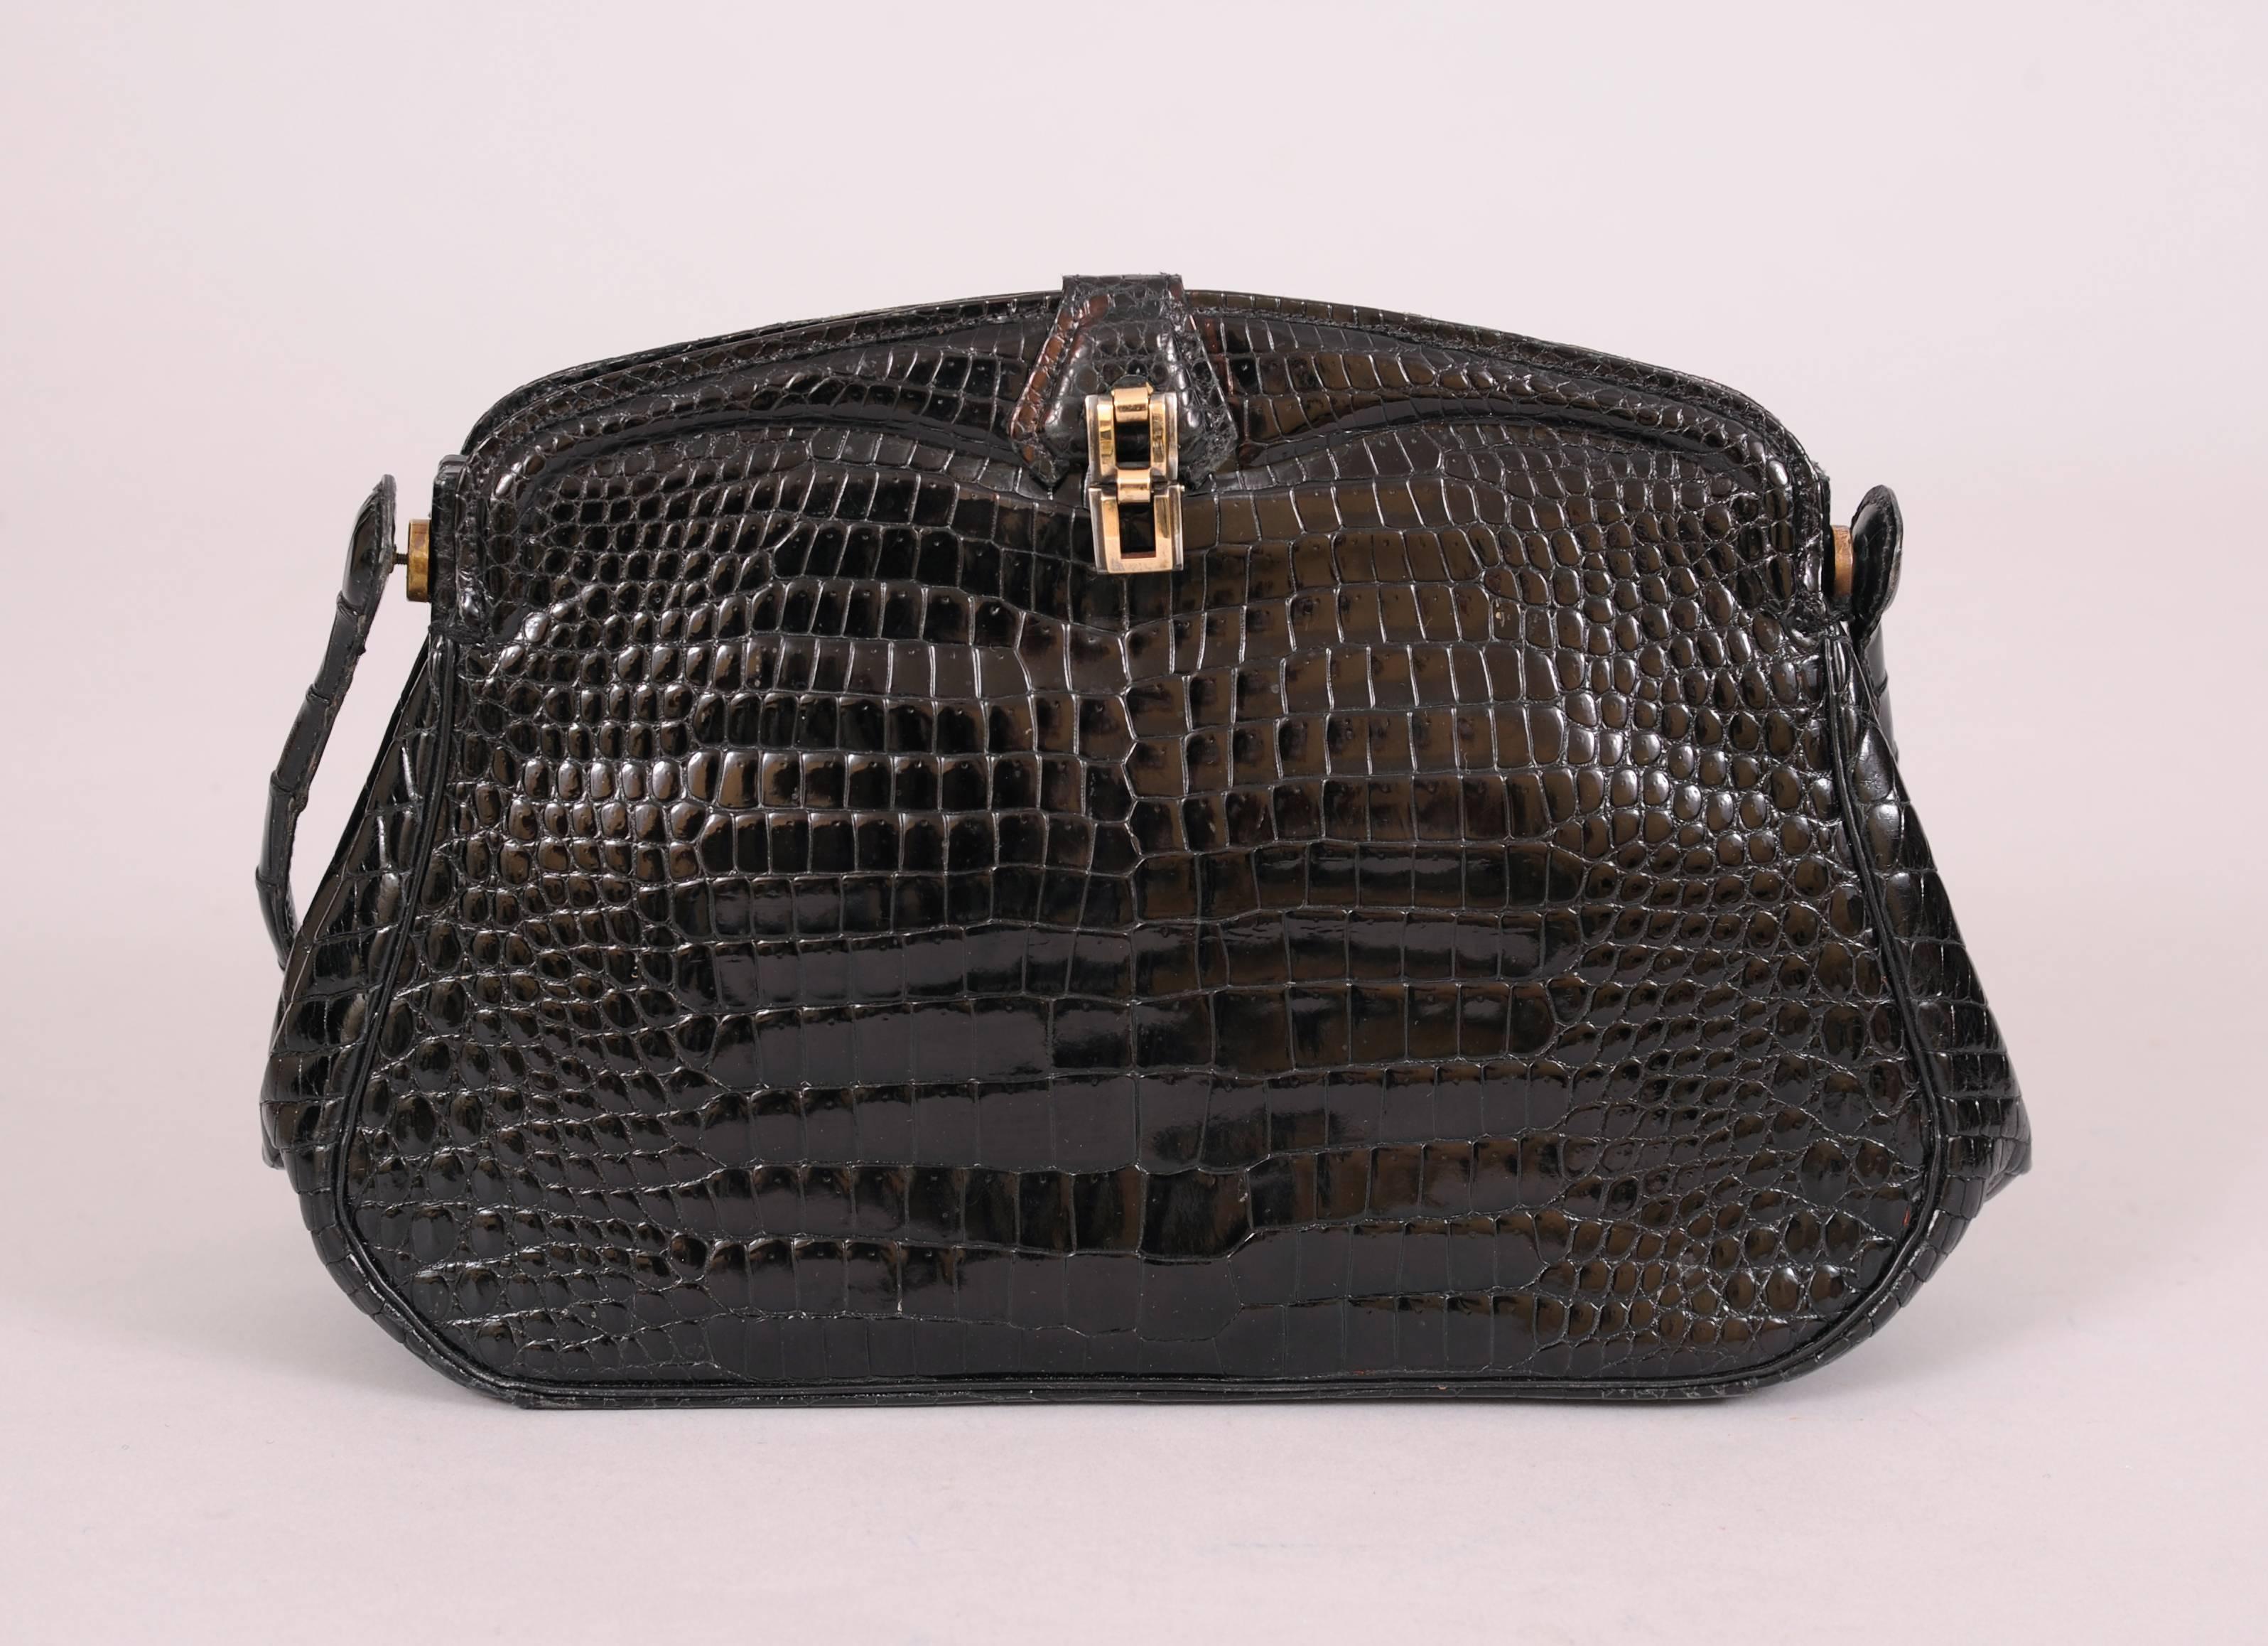 This elegant black crocodile evening bag is made from beautiful matched skins on the front and back. The handle swings down to create a clutch. There is a hallmarked sterling silver and gold clasp. The leather lined bag has two open sections and a